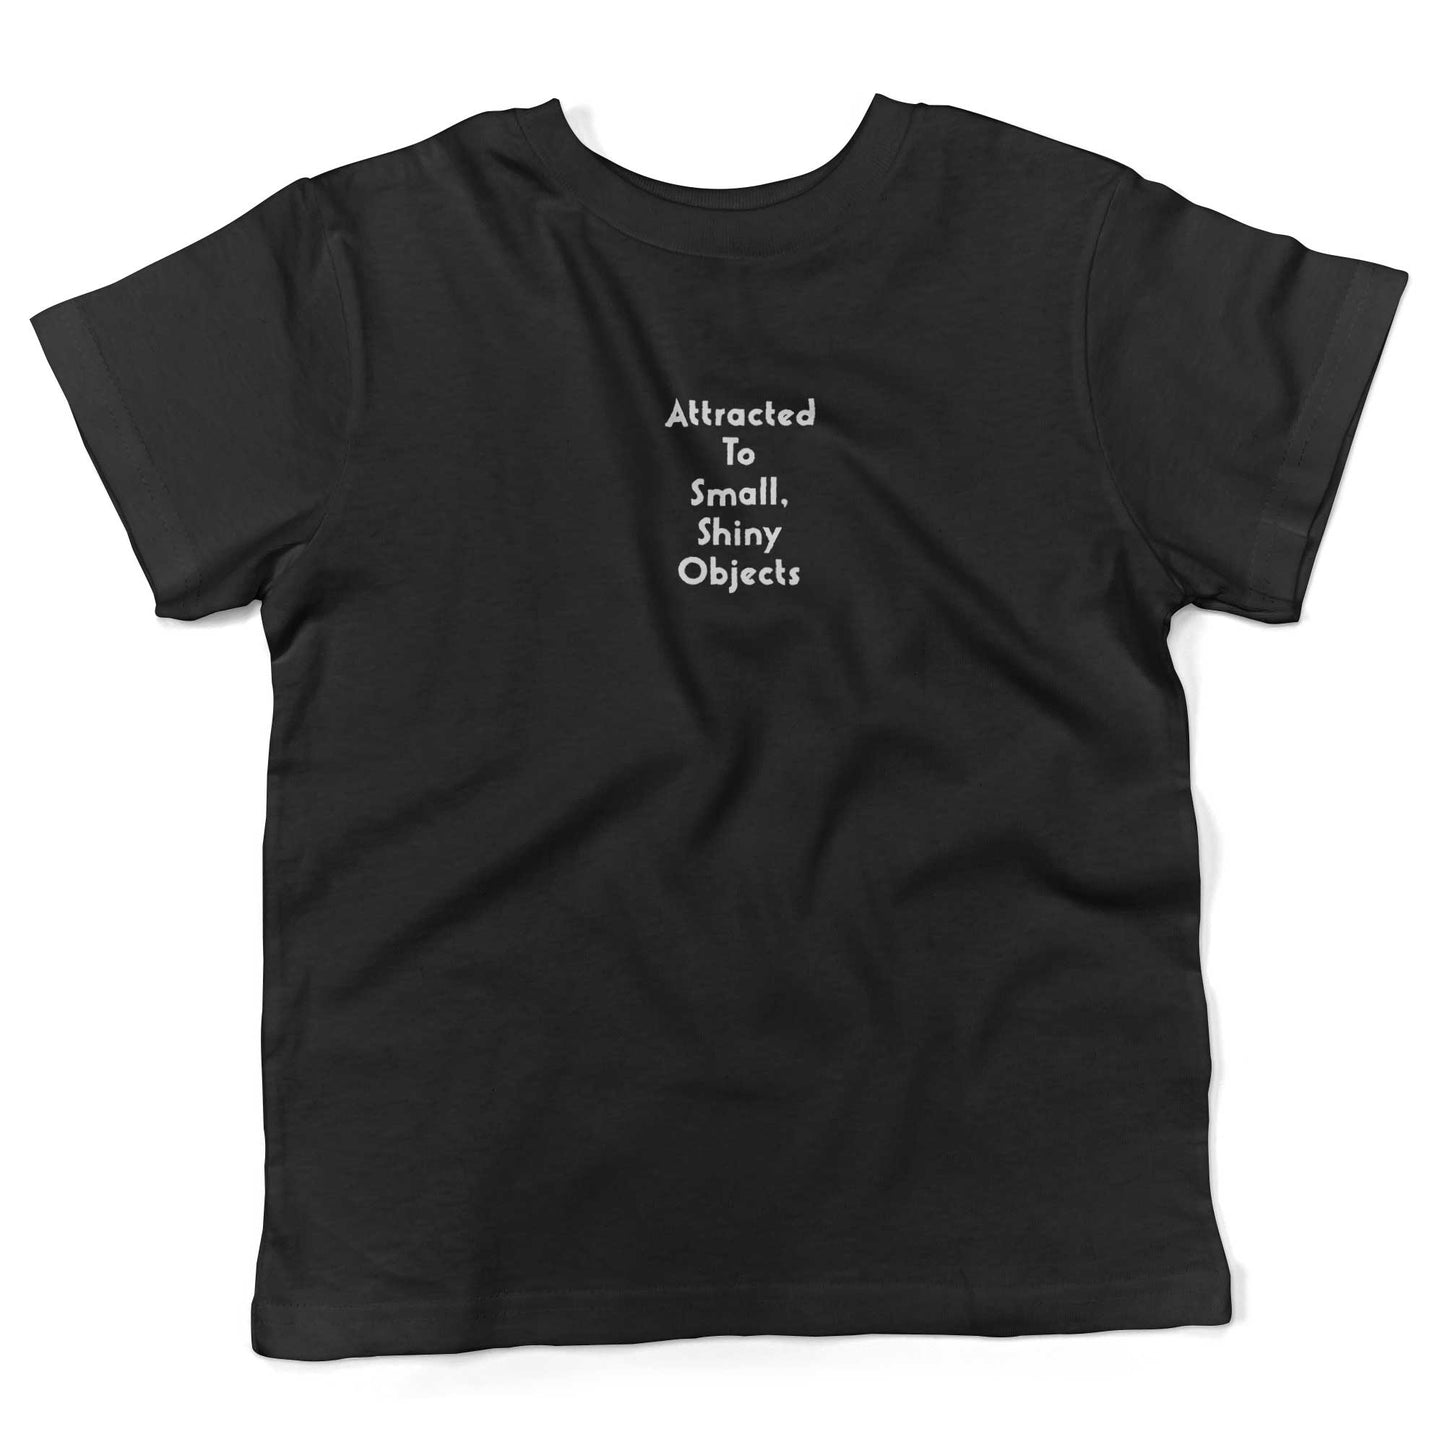 Attracted To Small, Shiny Objects Toddler Shirt-